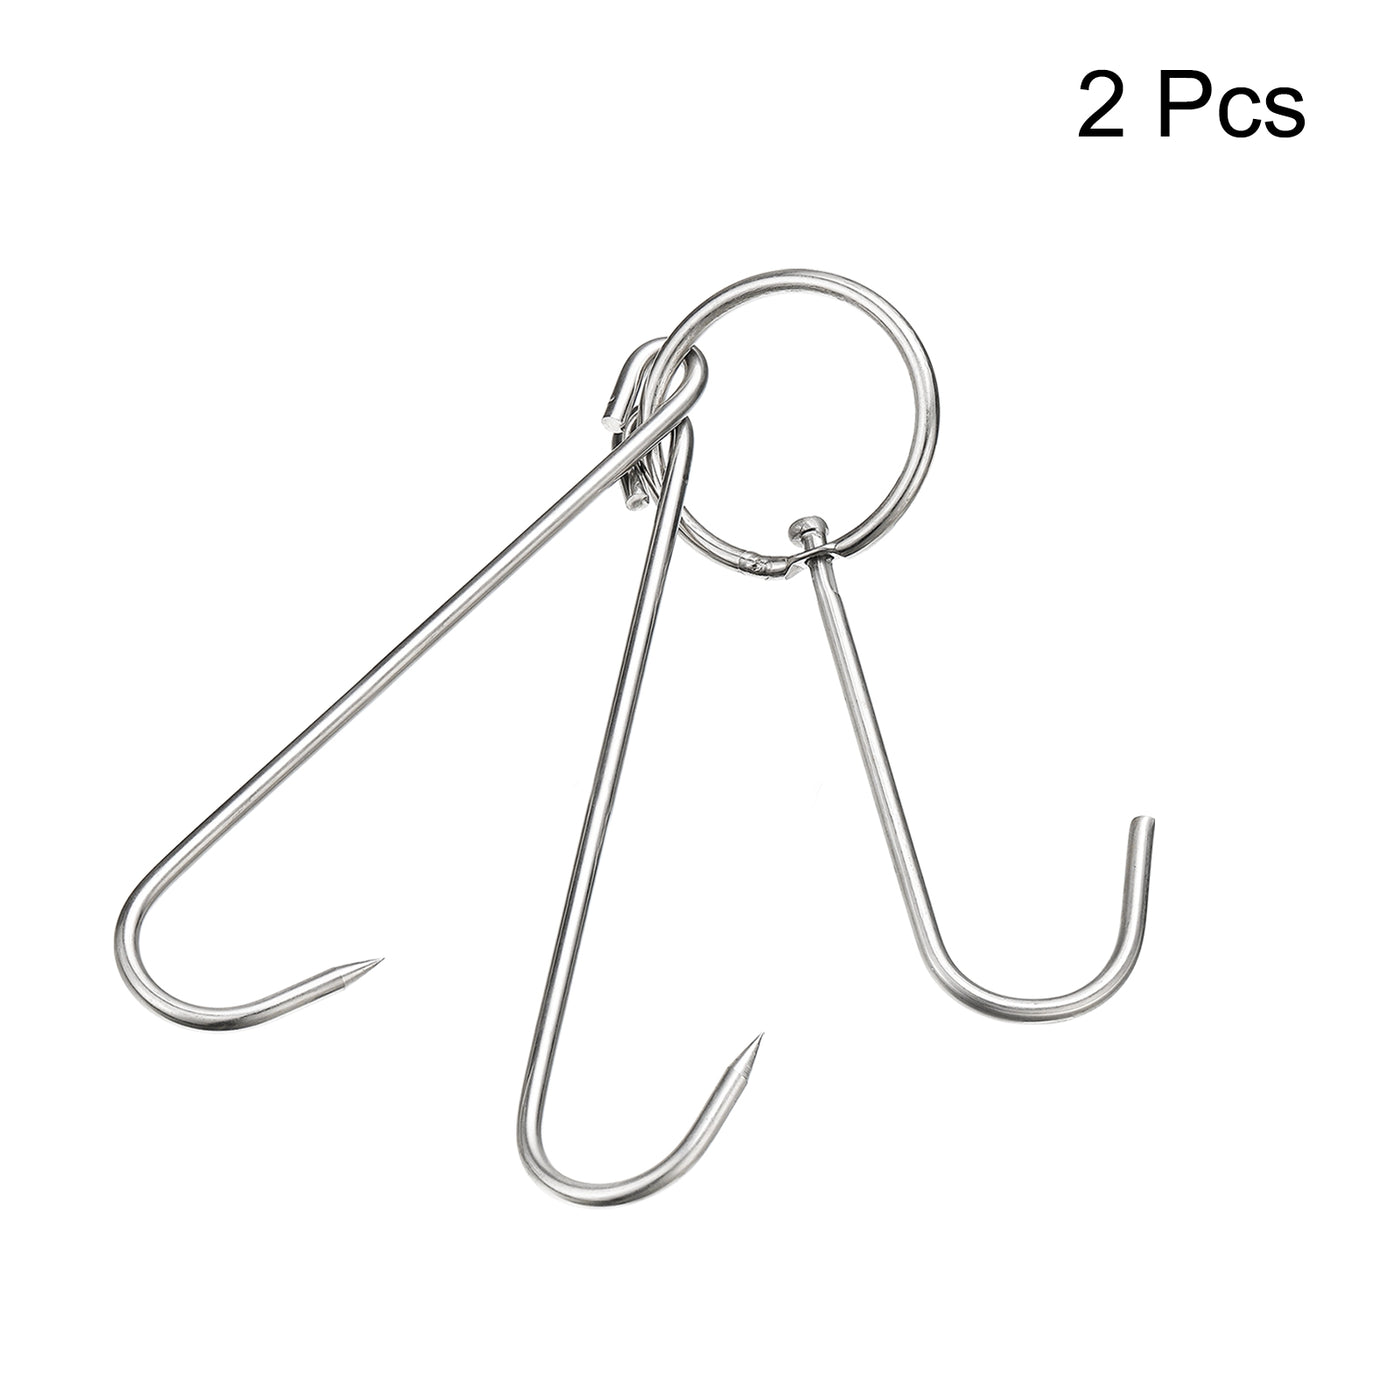 uxcell Uxcell Double Meat Hooks, Stainless Steel Smoker Hook Tools for Grilling Cooking Fish Chicken